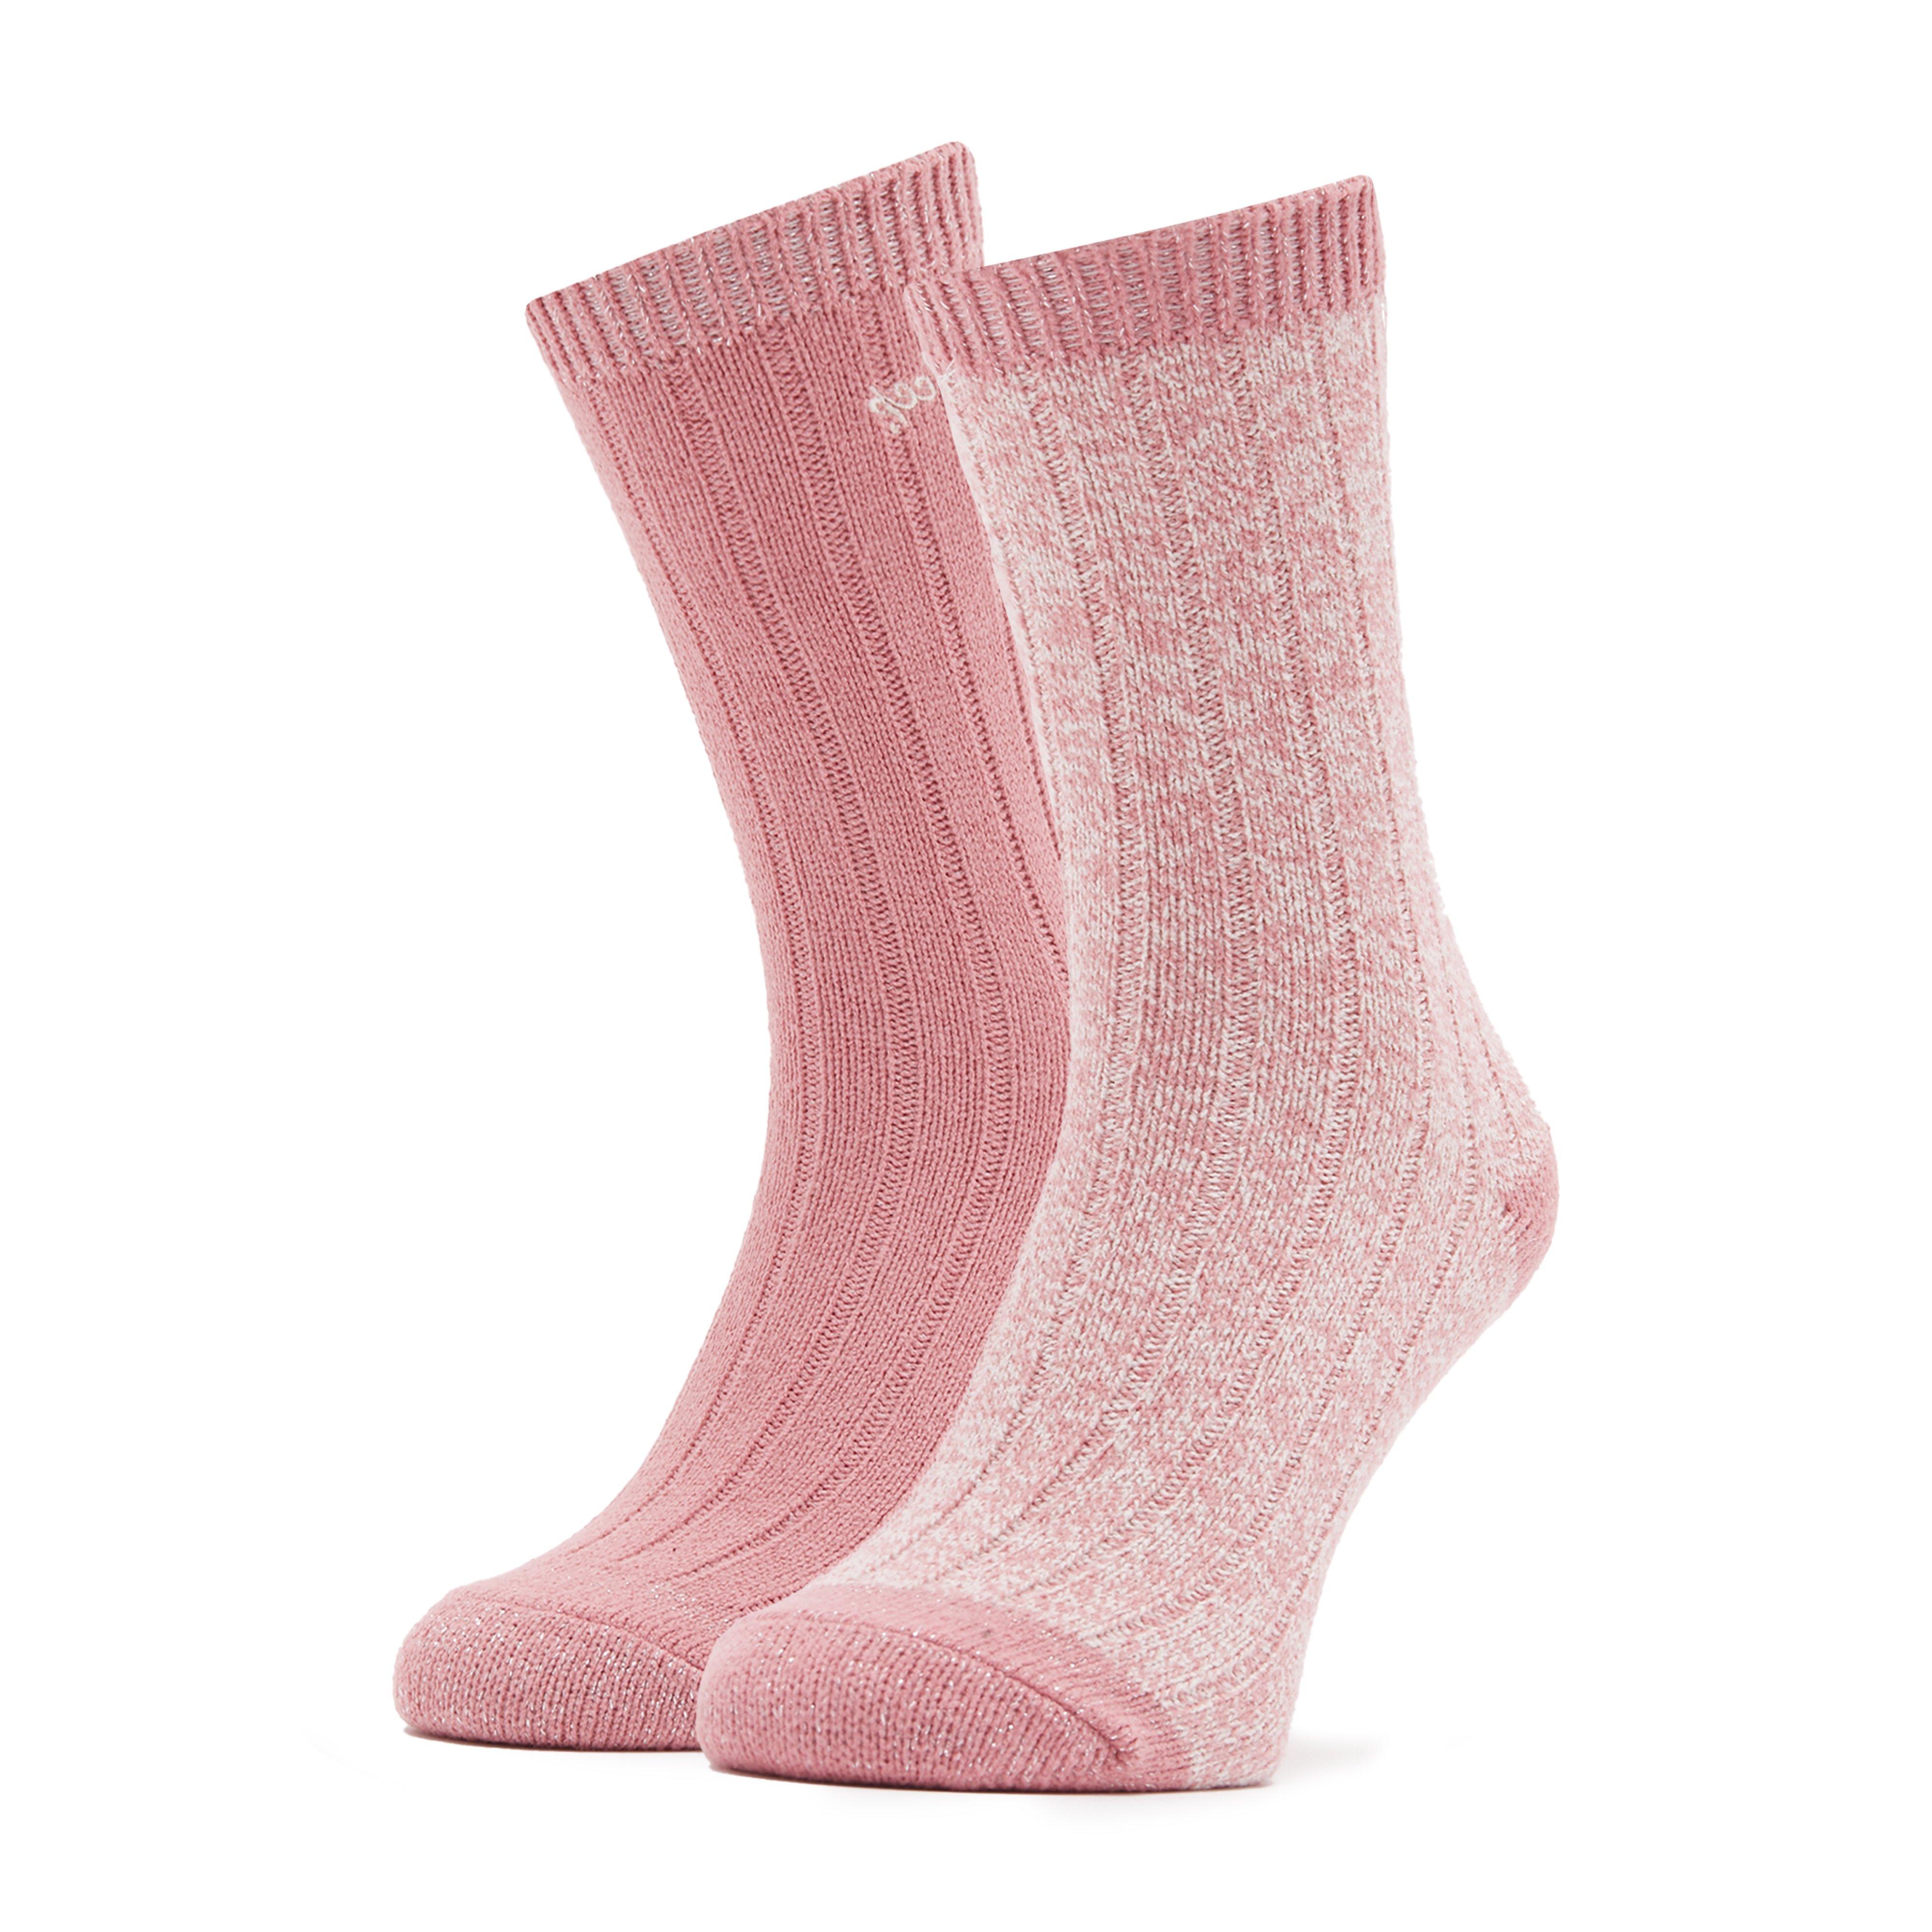 Womens Supersoft Boot Socks 2 Pack Rose